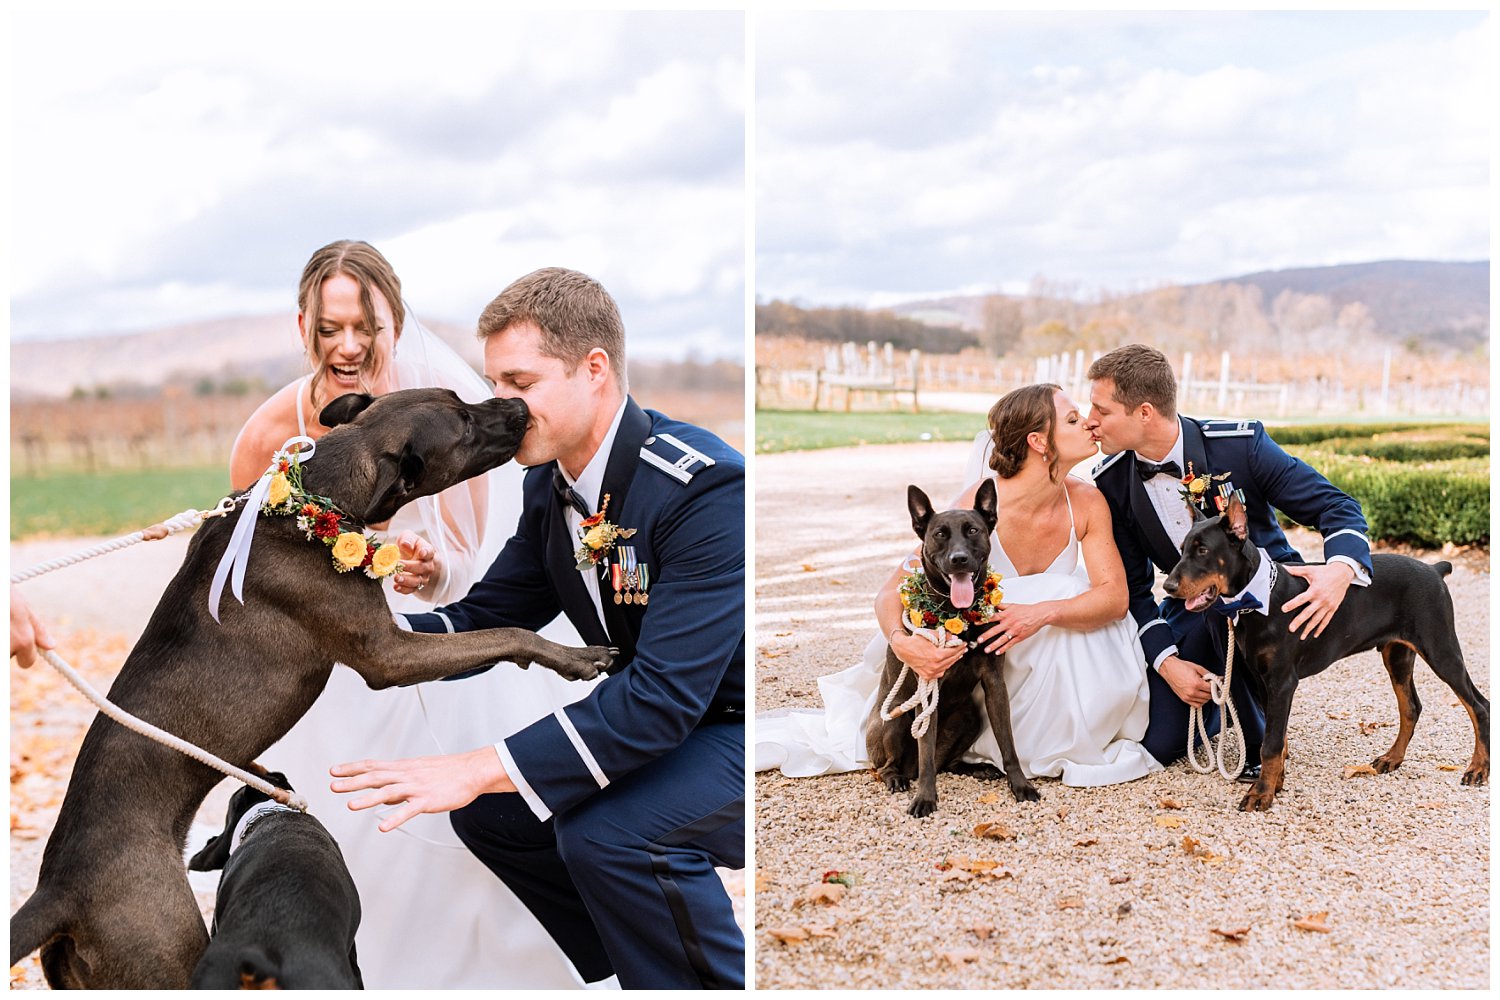 Bride & Groom pose with their dogs at Keswick Vineyard Wedding photographed by Heather Dodge Photography